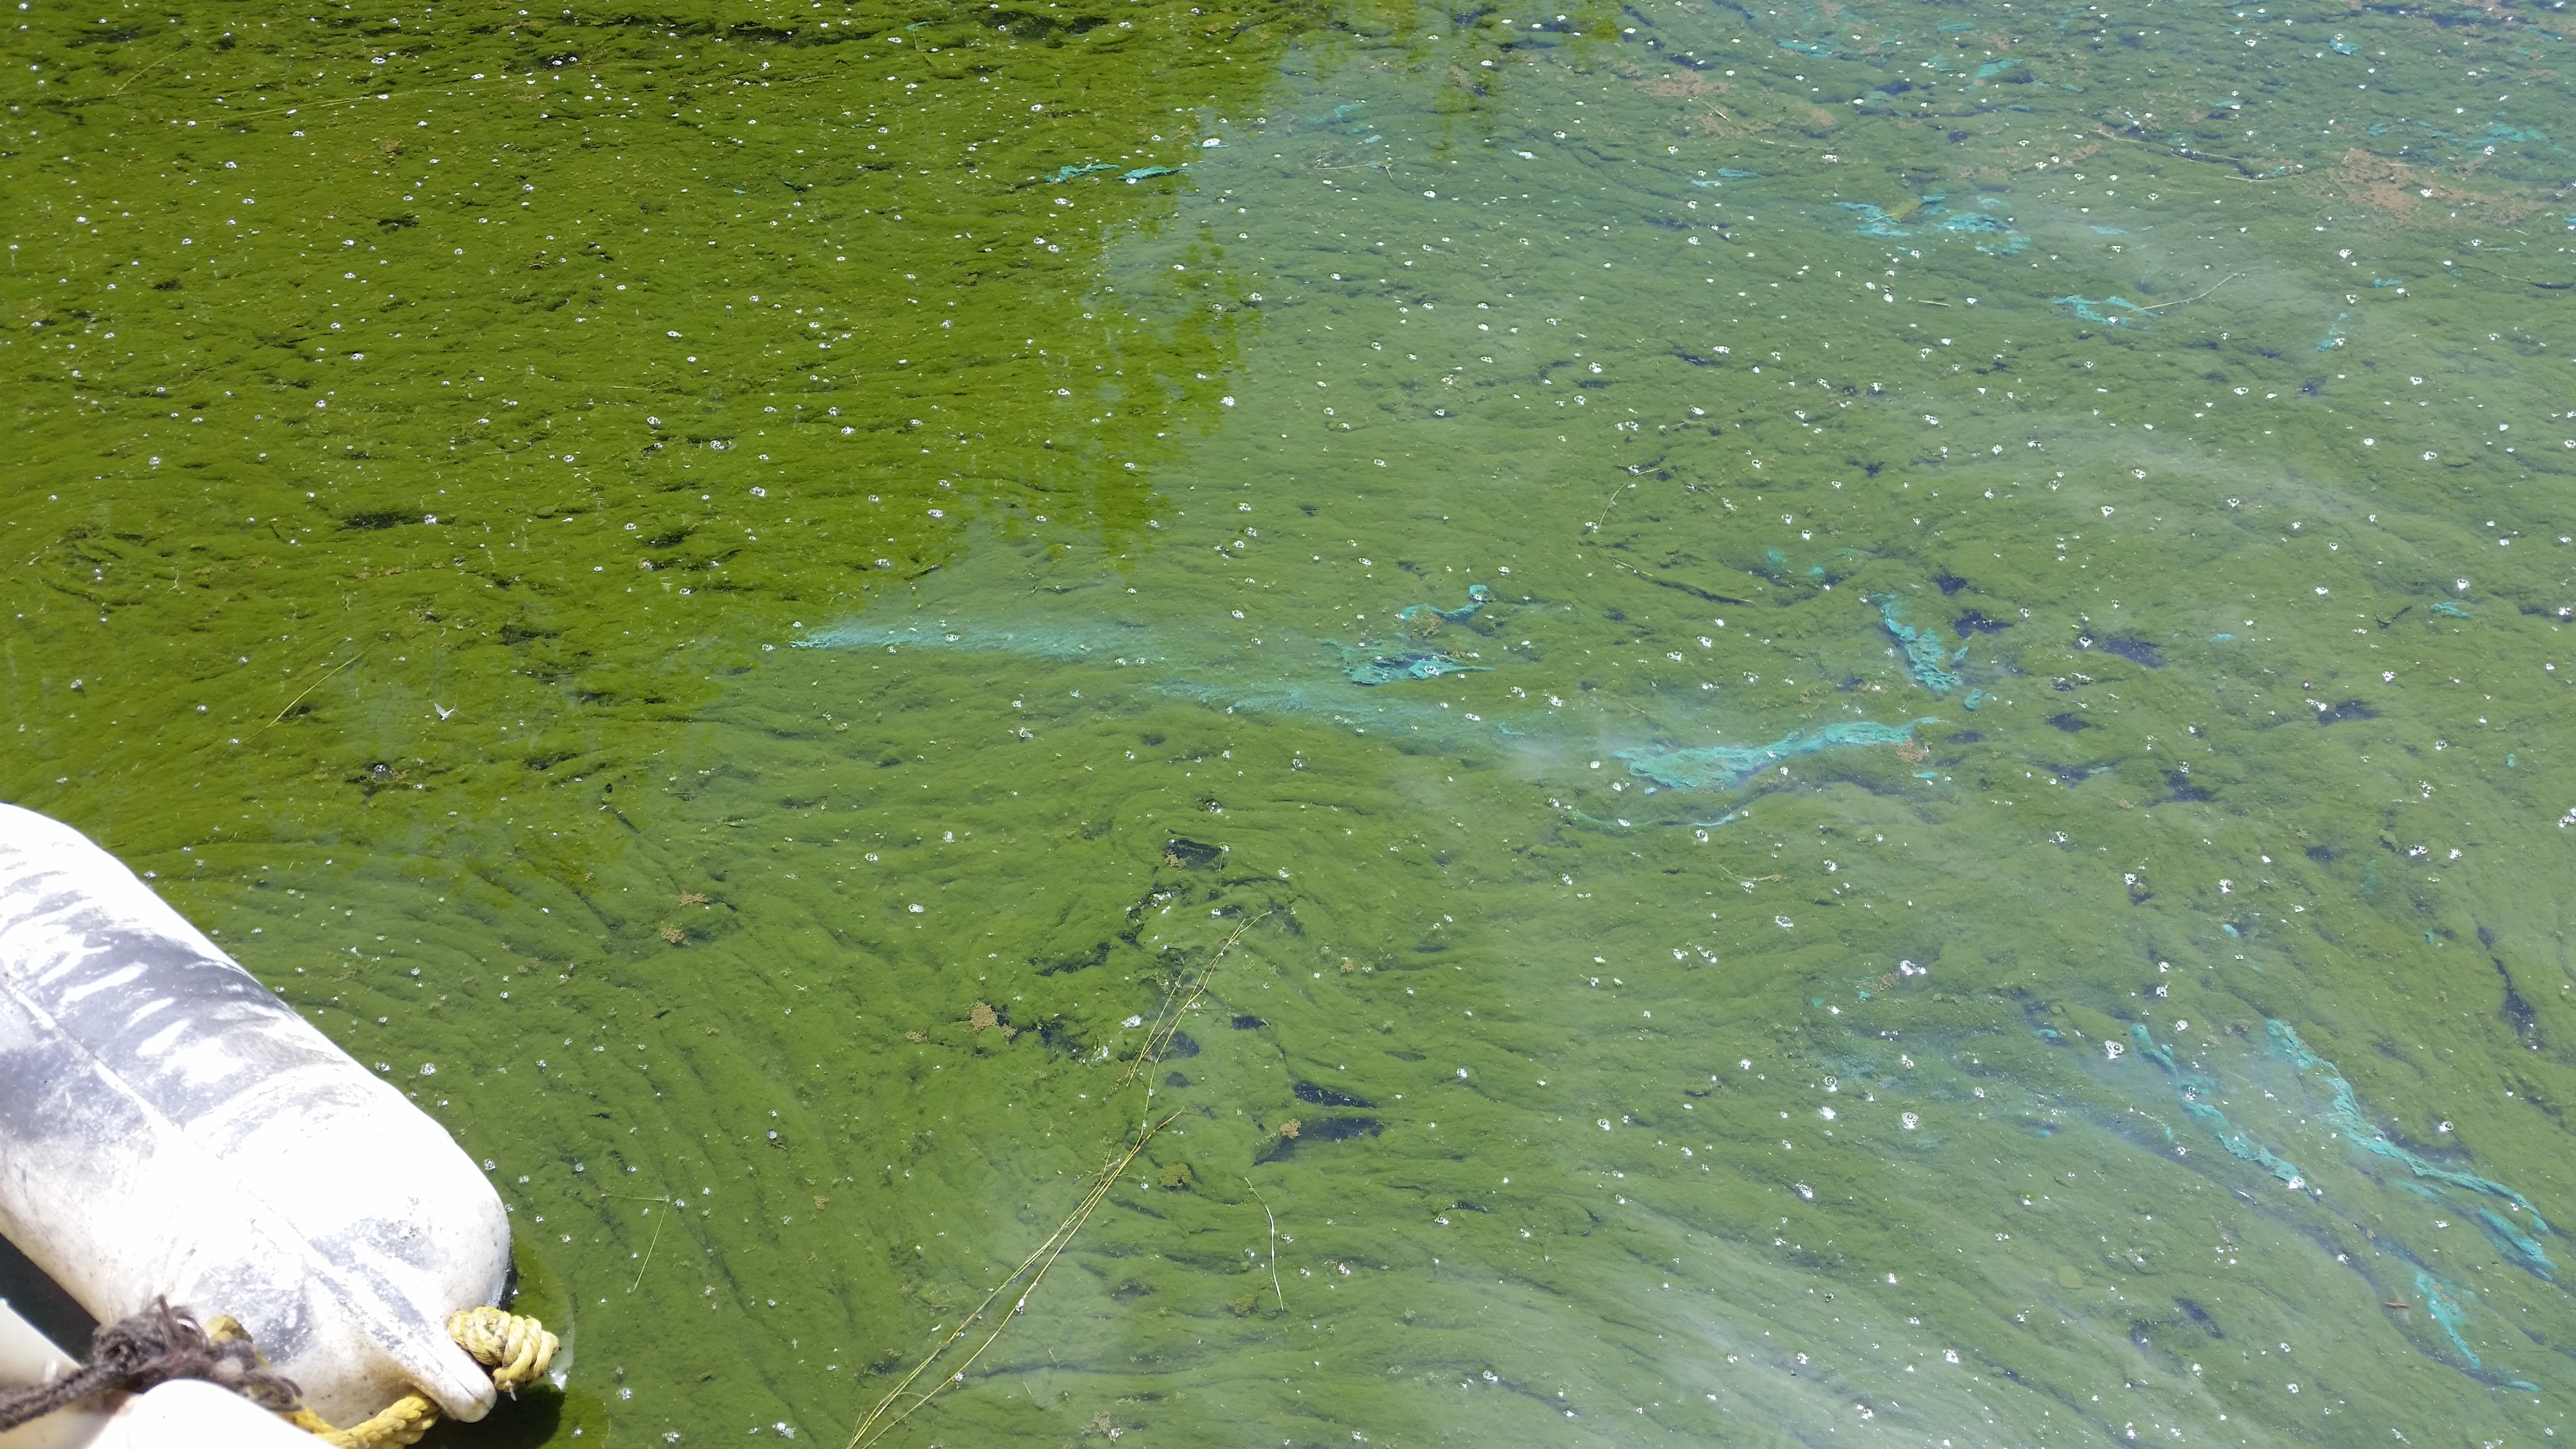 A massive late-stage algal bloom on Upper Klamath Lake in Oregon. The turquoise color is algal pigments being released during cell death.